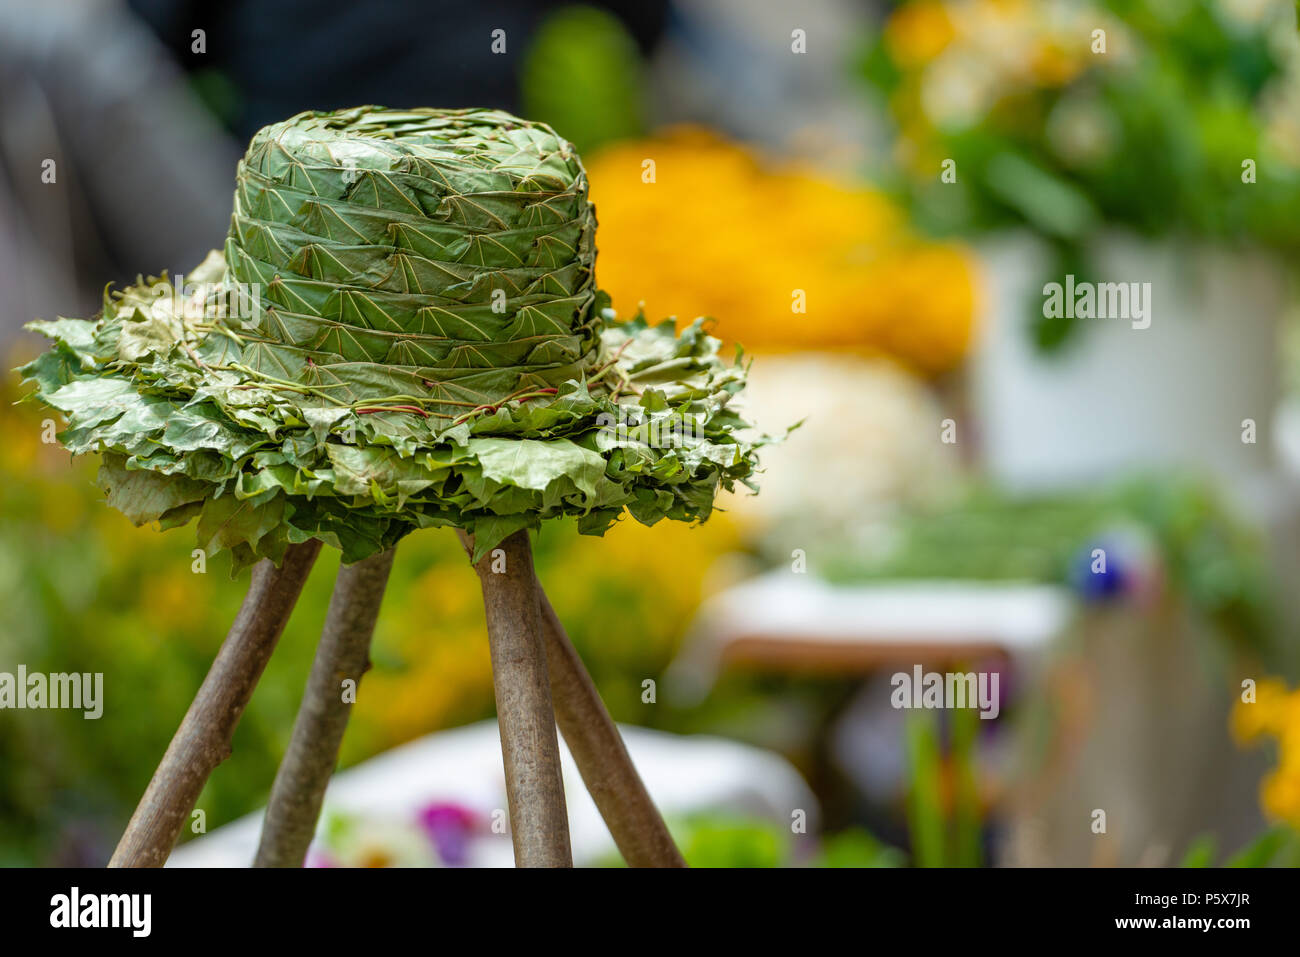 Wooden stand with a hat made of green wooden leaves. Stock Photo